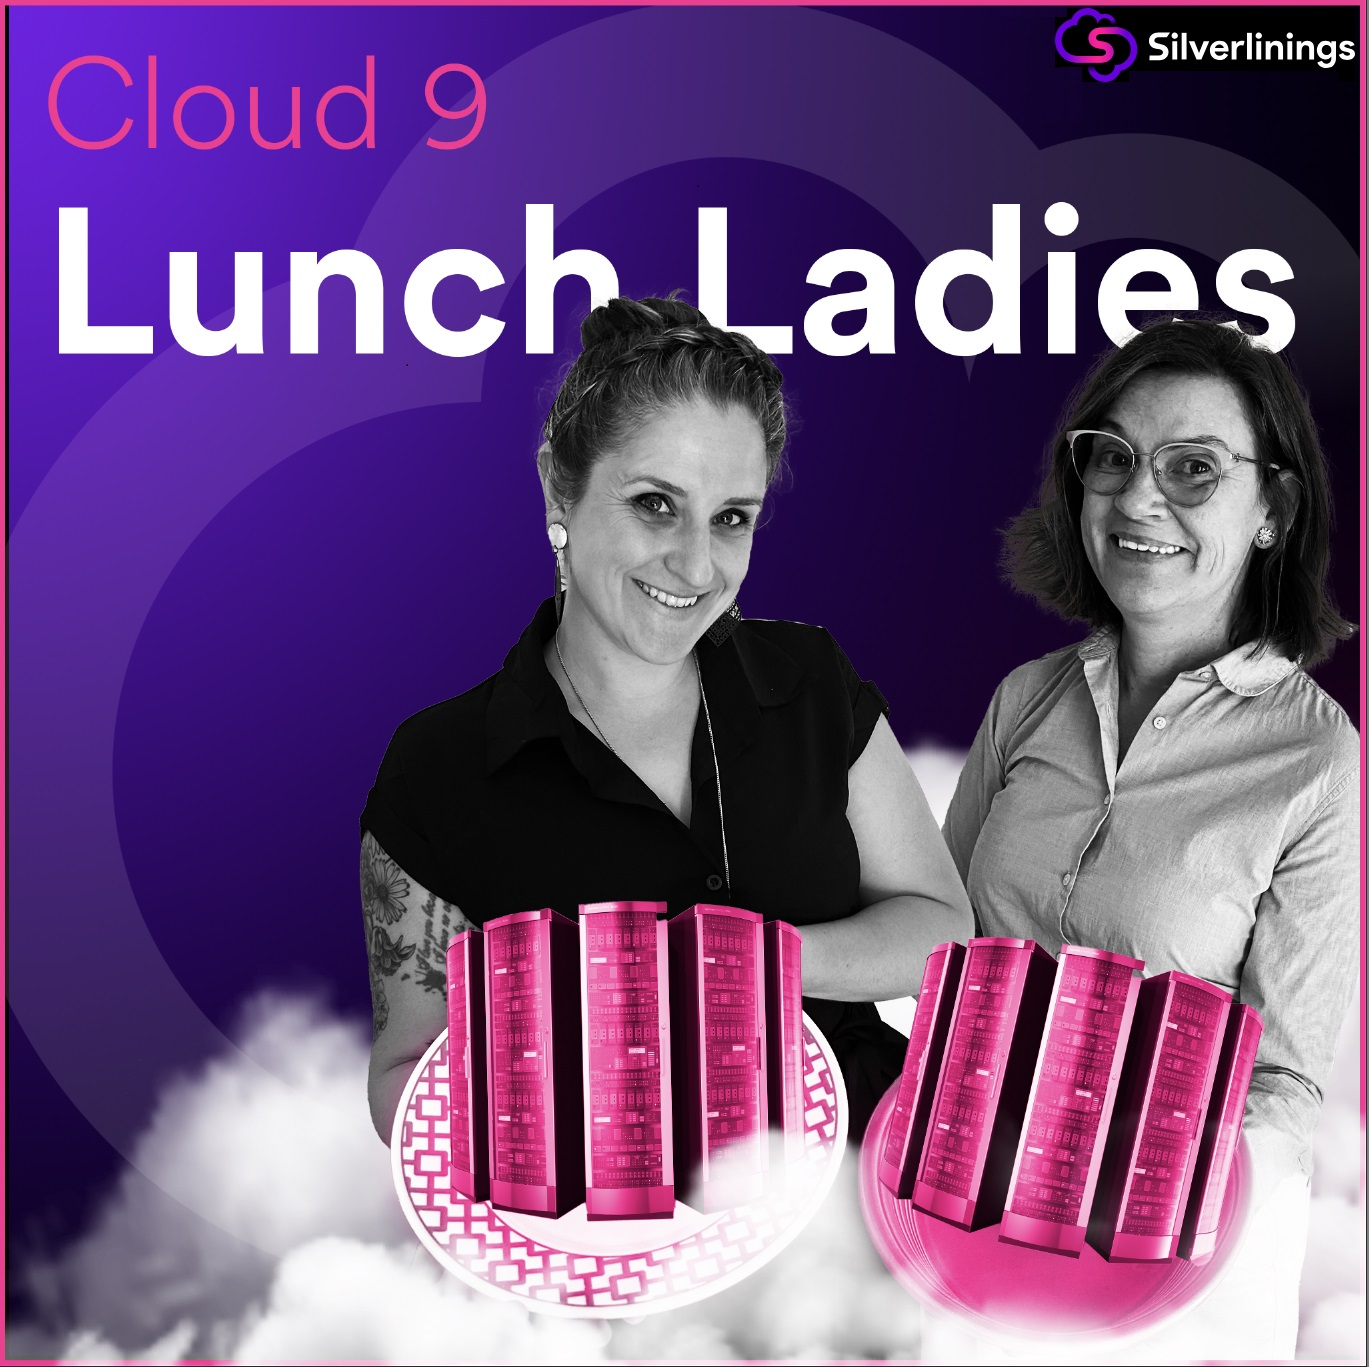 Cloud 9: Lunch Ladies News Wrap - Digital transformation for manufacturers, data centers and margaritas!